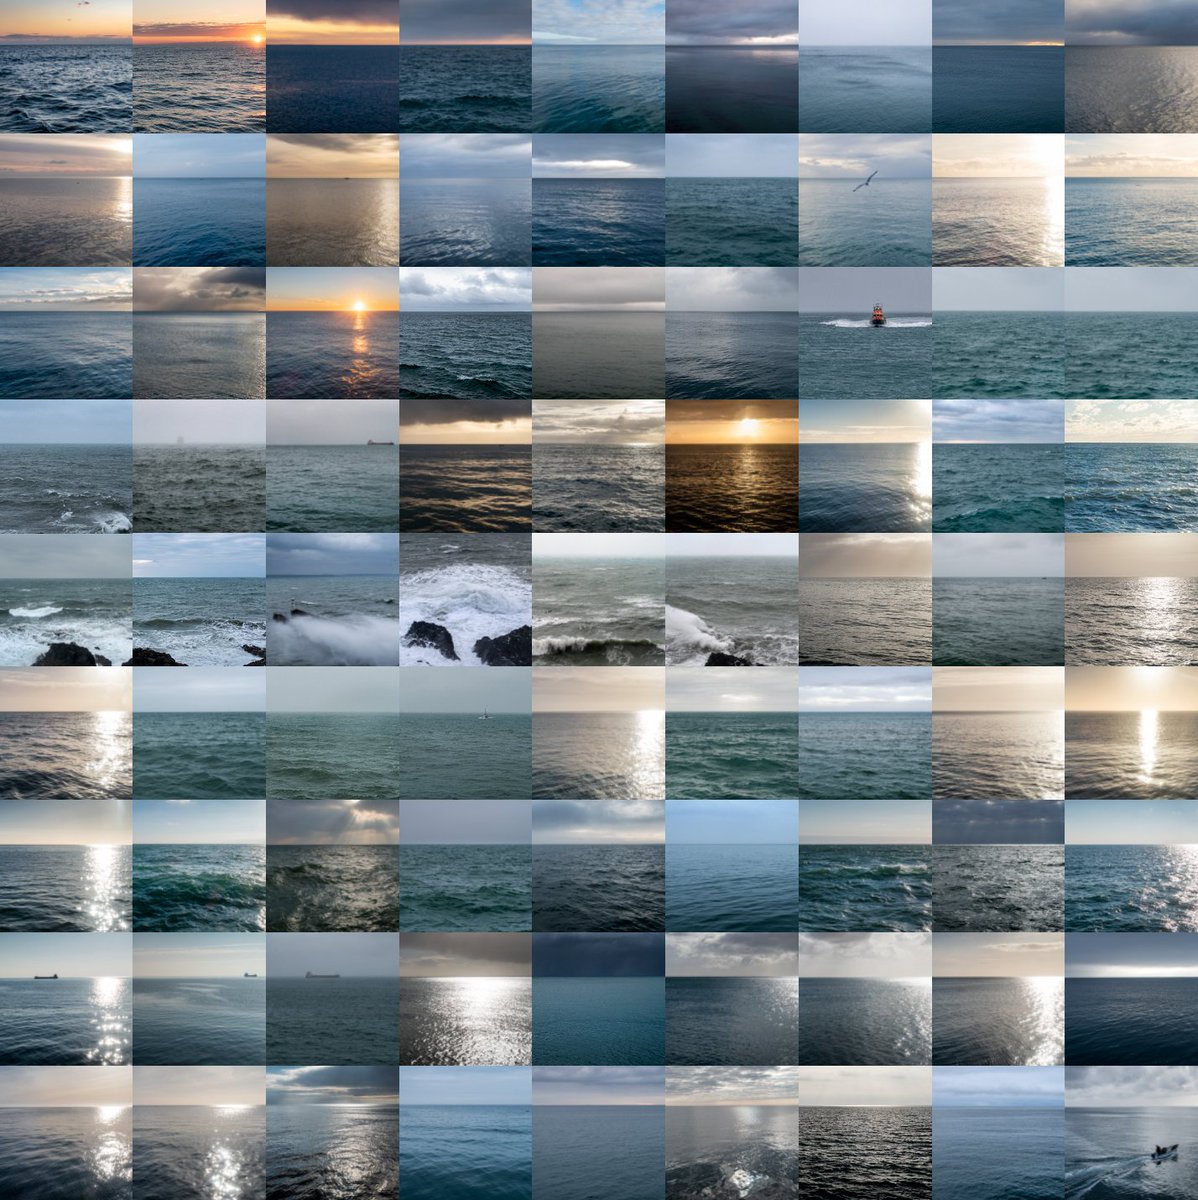 Every sea & sky photo taken from the same viewpoint between 6th Jan - 25th March. These are the days I worked from home during this third lockdown. I'm mostly working back in the studio in Truro now. This view kept me going through this long winter. #Cornwall